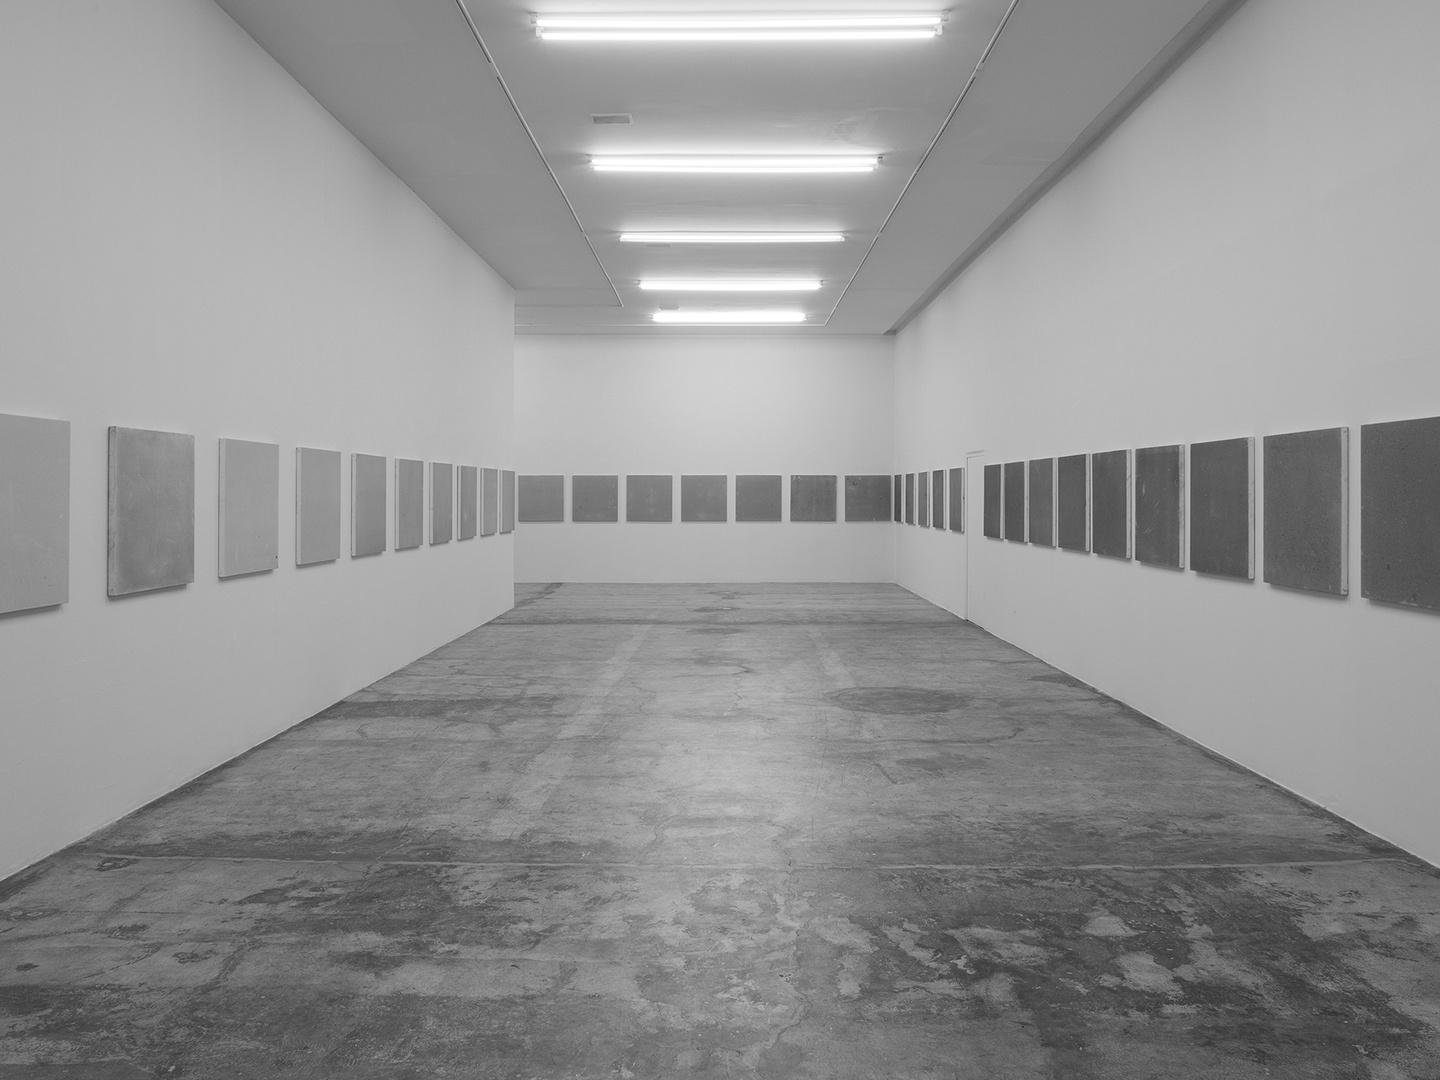 A sequence of square, gray canvases that progressively turn darker as installed in a line around a gallery